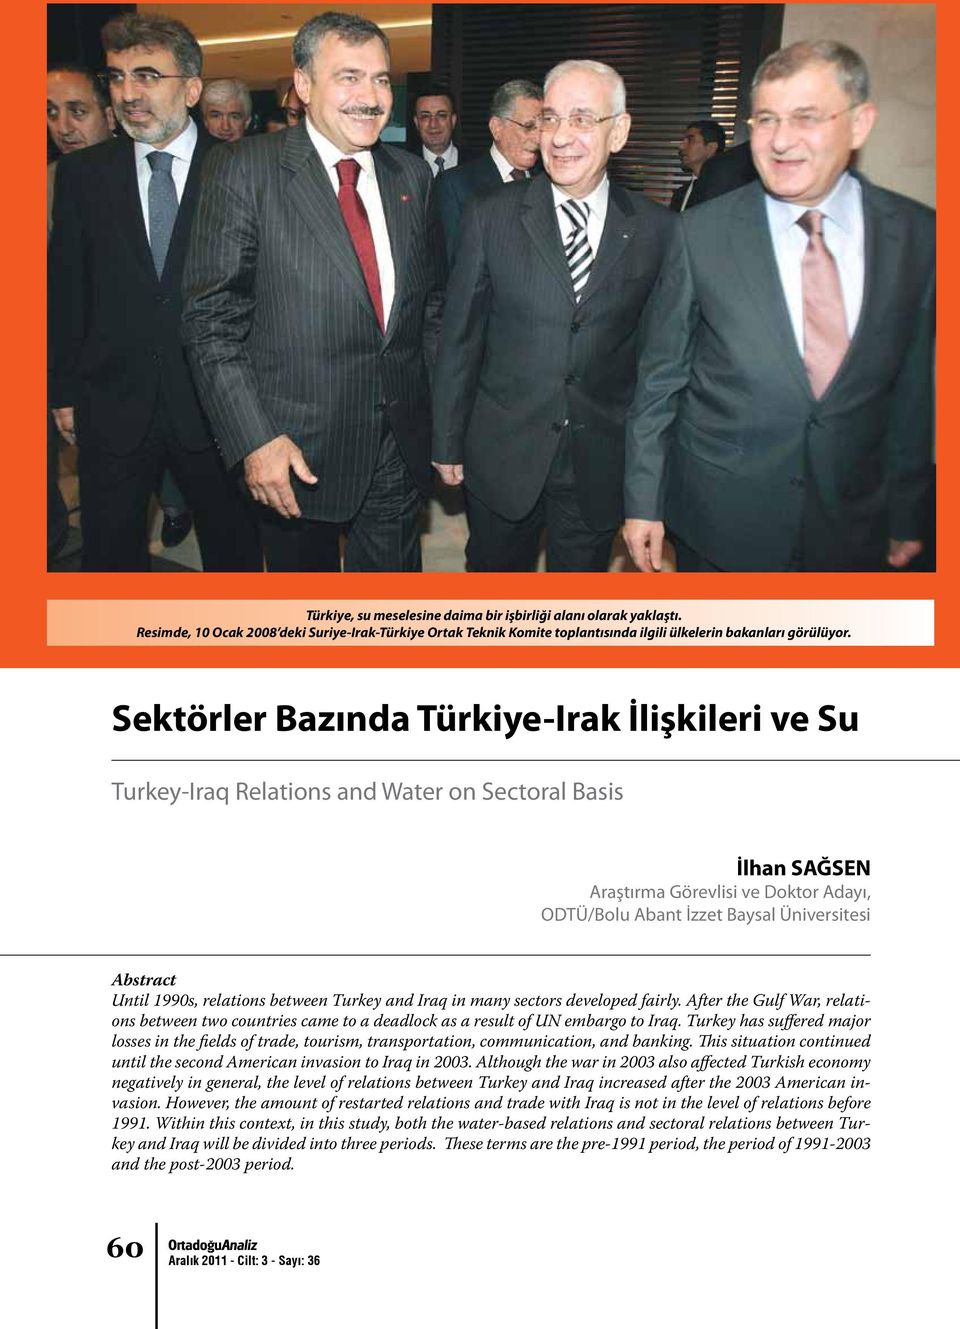 Until 1990s, relations between Turkey and Iraq in many sectors developed fairly. After the Gulf War, relations between two countries came to a deadlock as a result of UN embargo to Iraq.